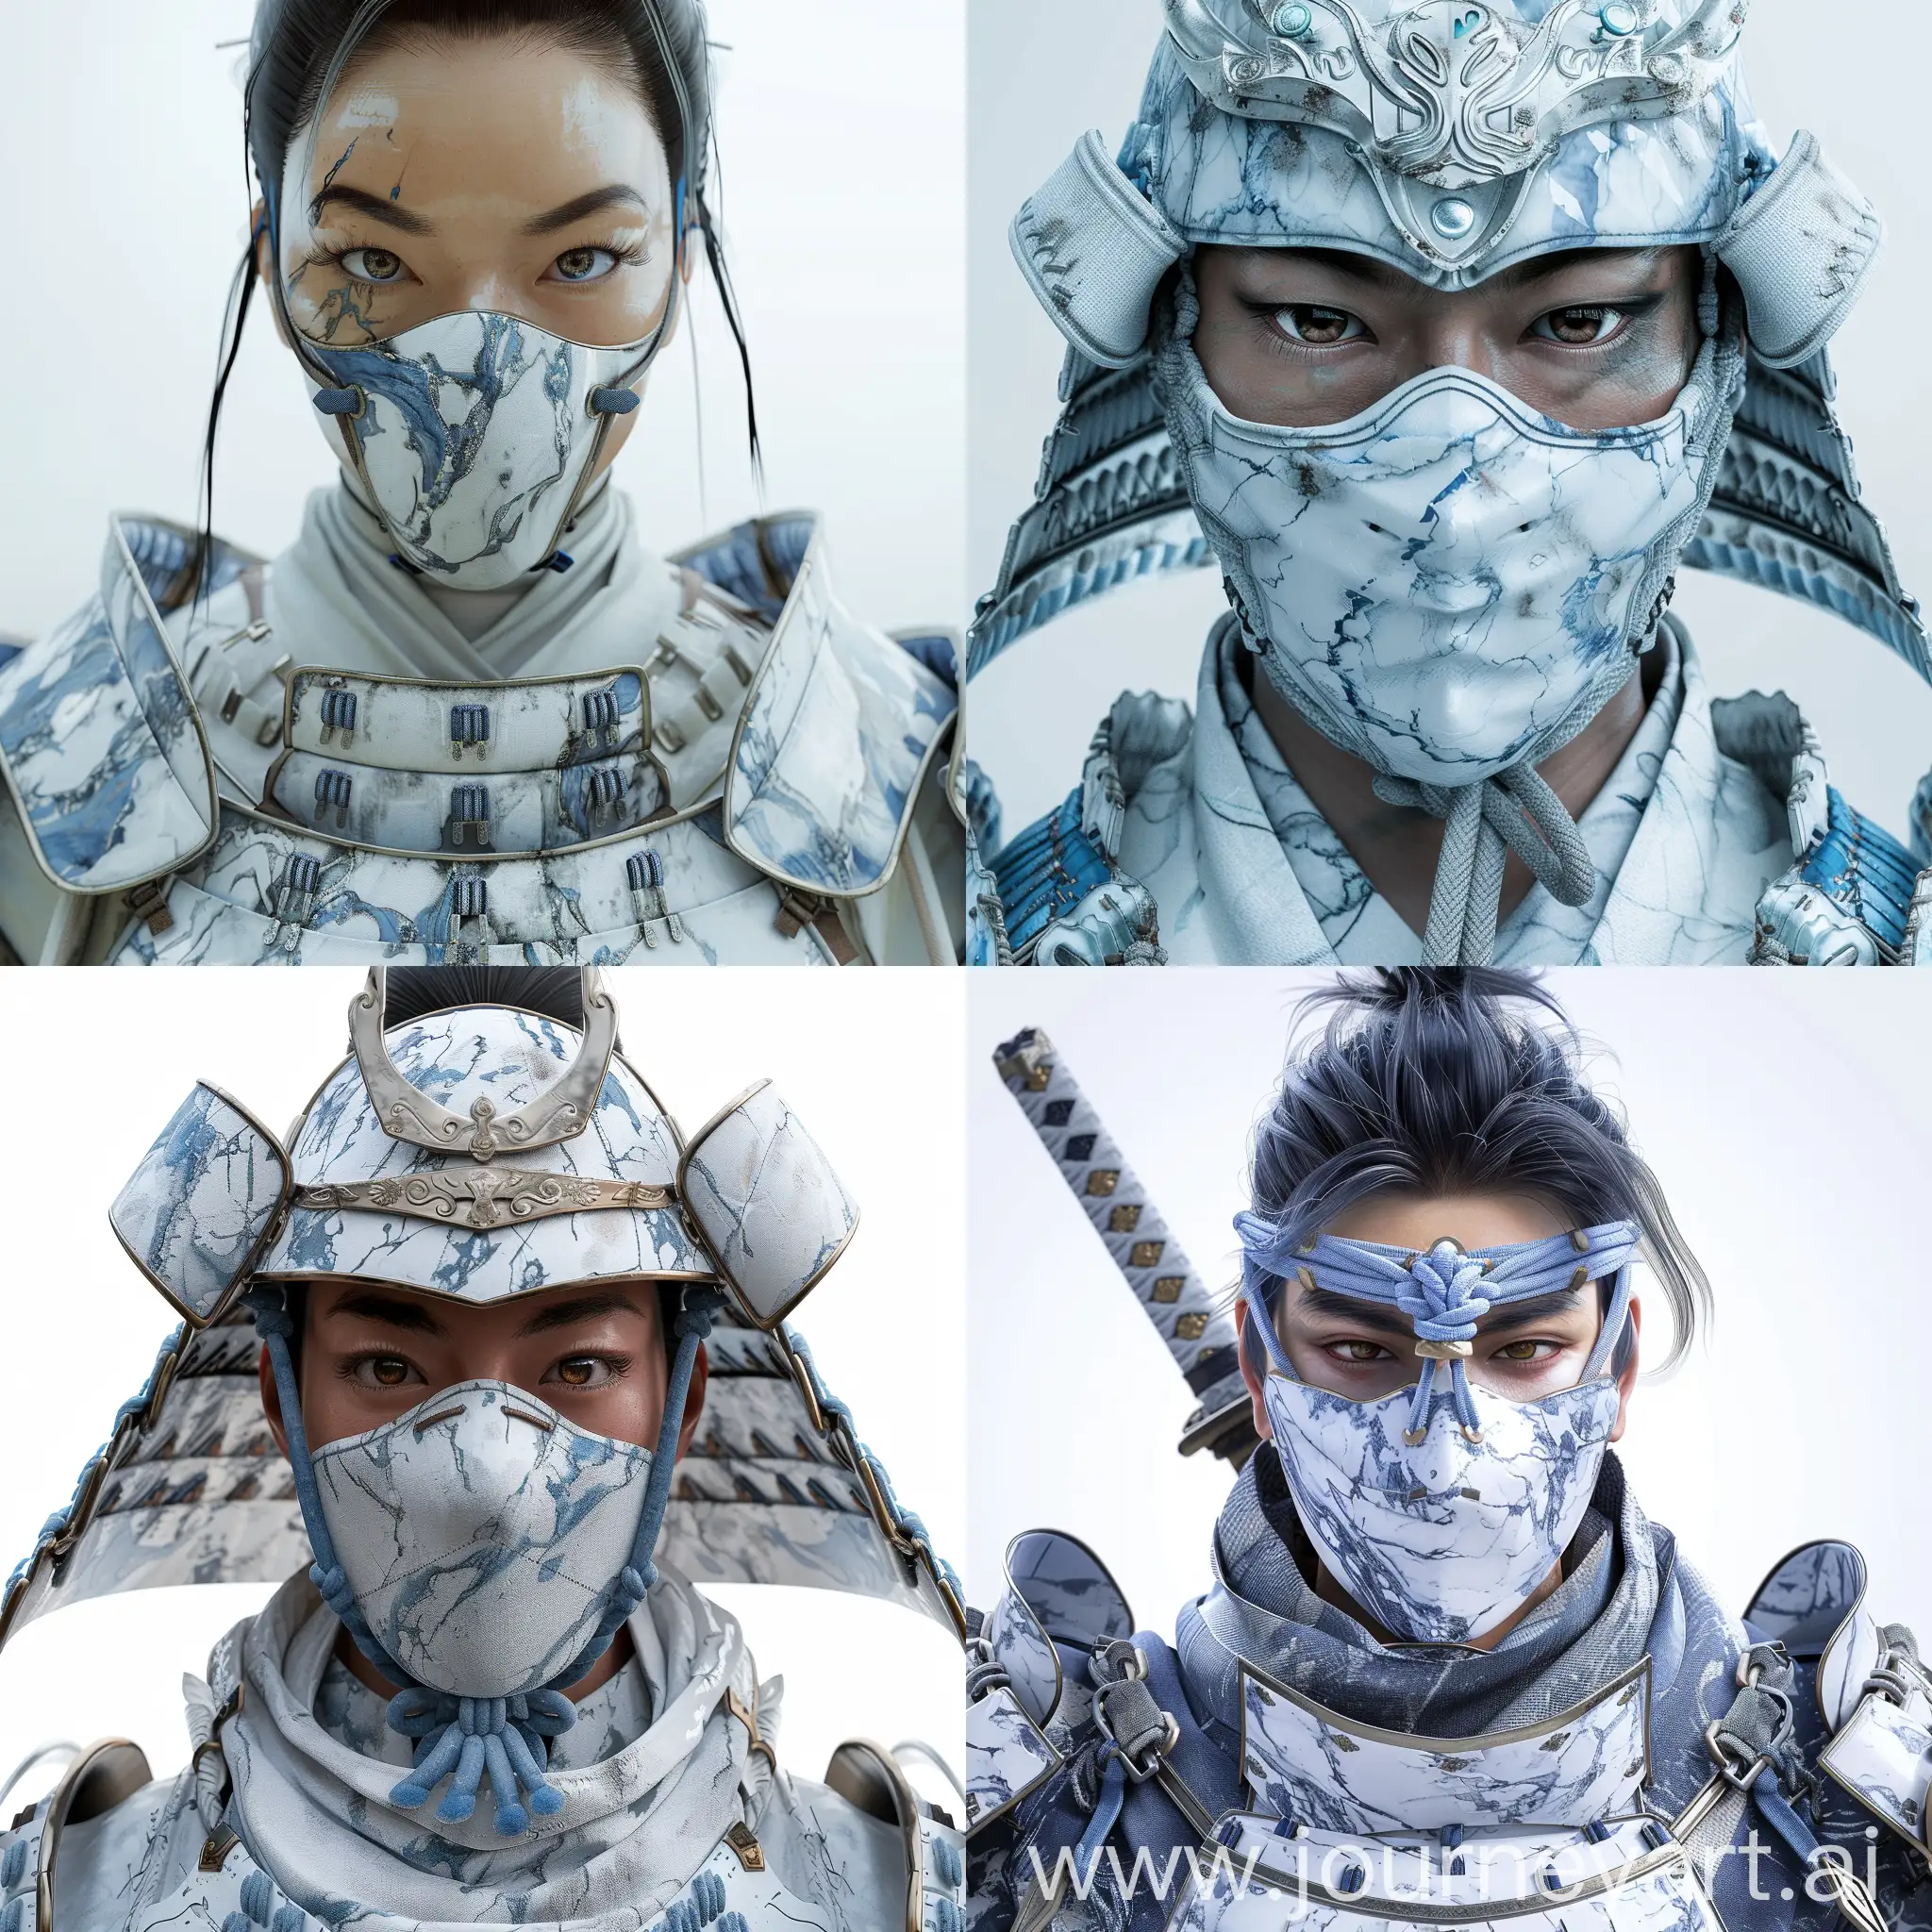 Stoic-Samurai-Warrior-Wearing-Ornate-Marble-Armor-and-Mask